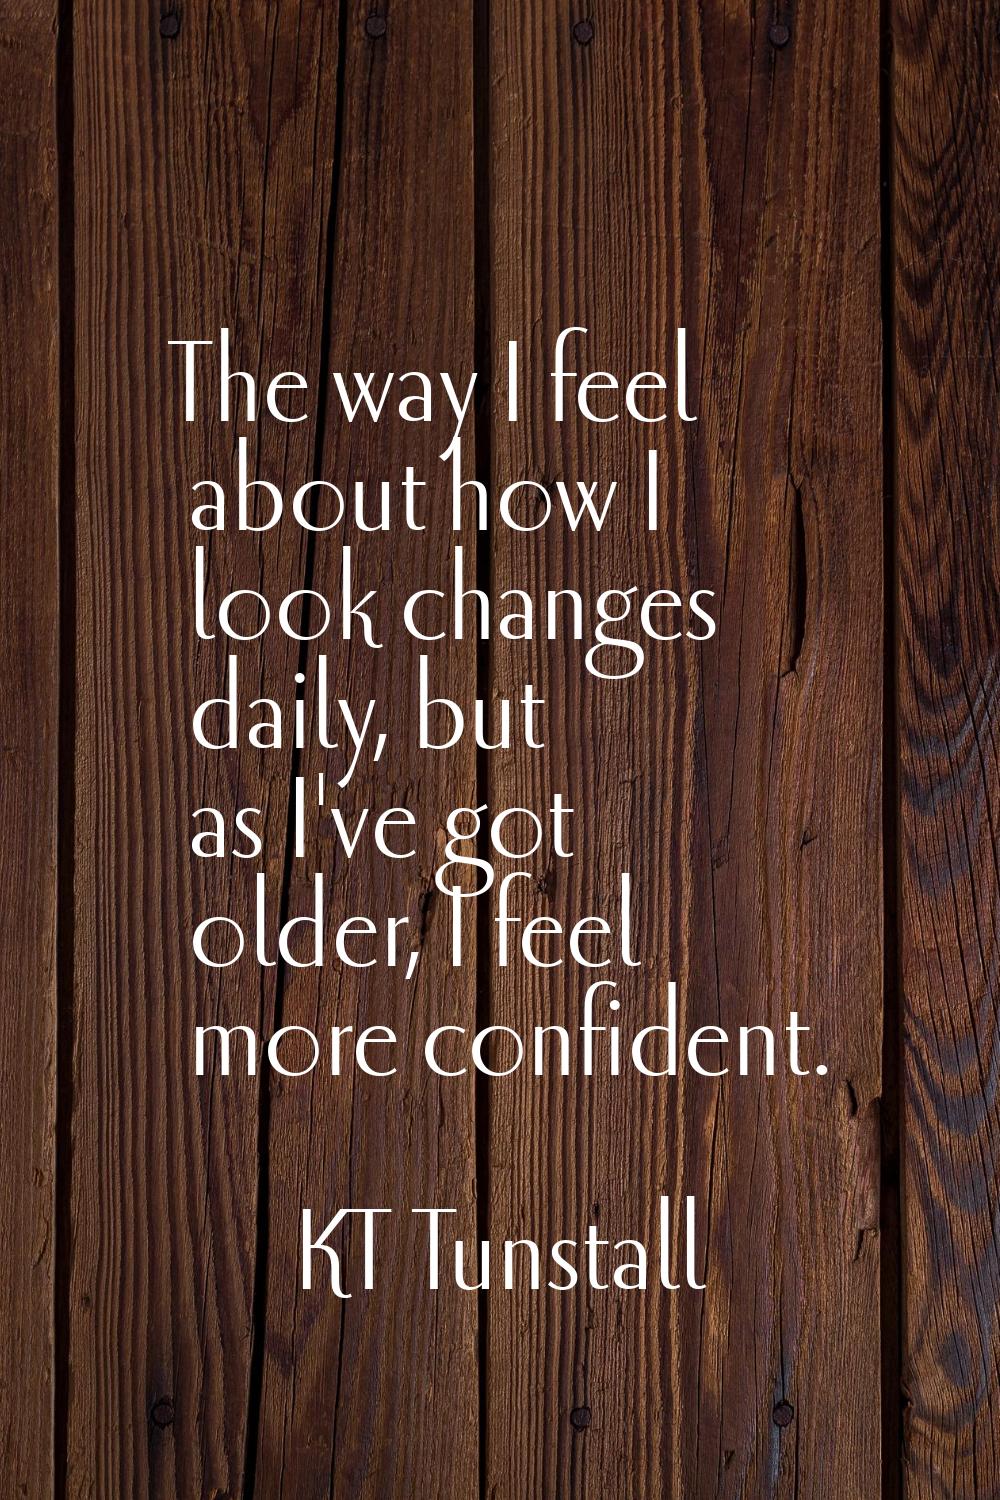 The way I feel about how I look changes daily, but as I've got older, I feel more confident.